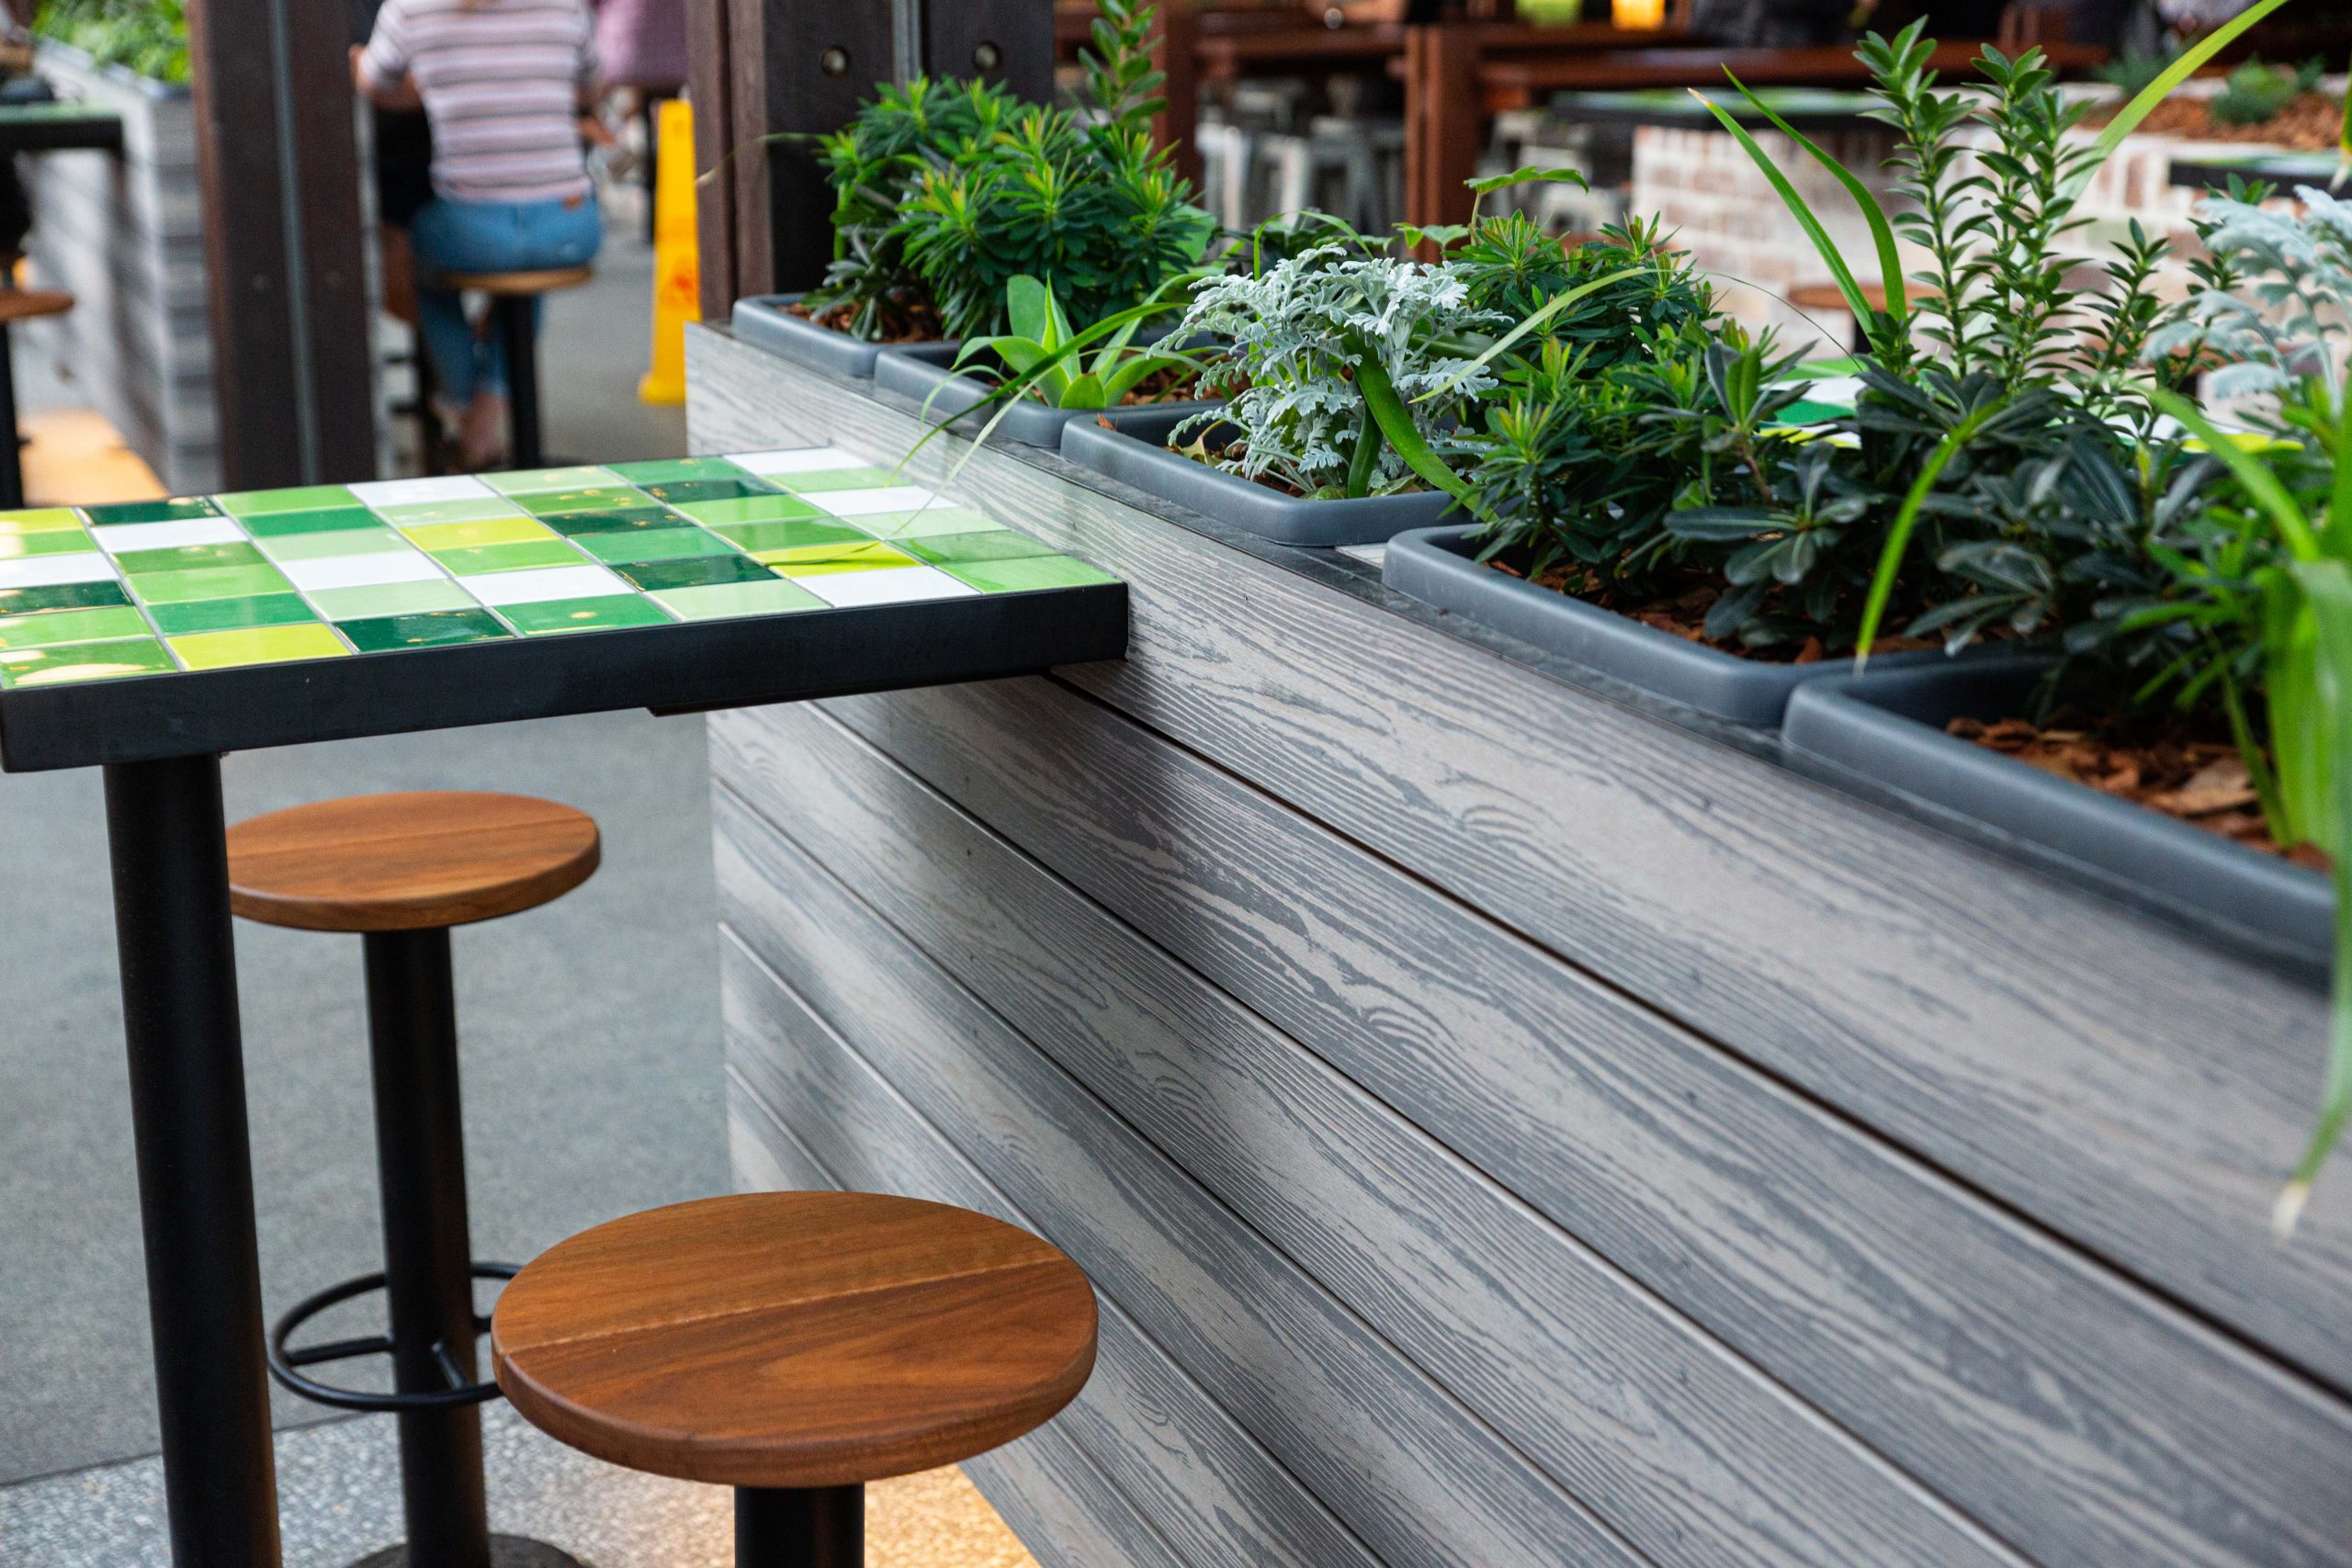 Planter boxes made from grey-silver composite decking boards